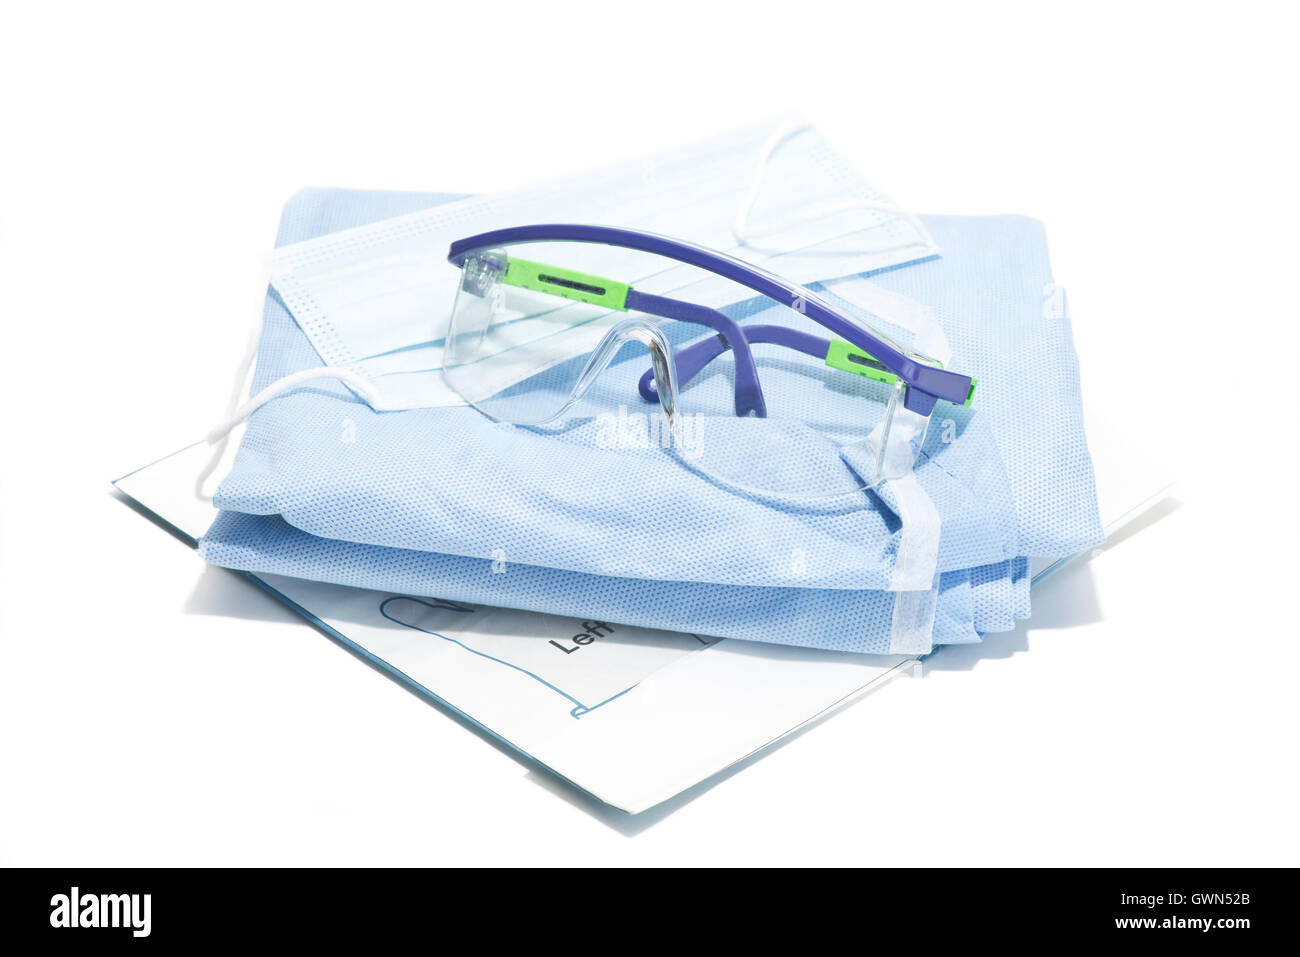 Gloves, mask, gown and safety glasses for personal protection during surgical procedures. Stock Photo